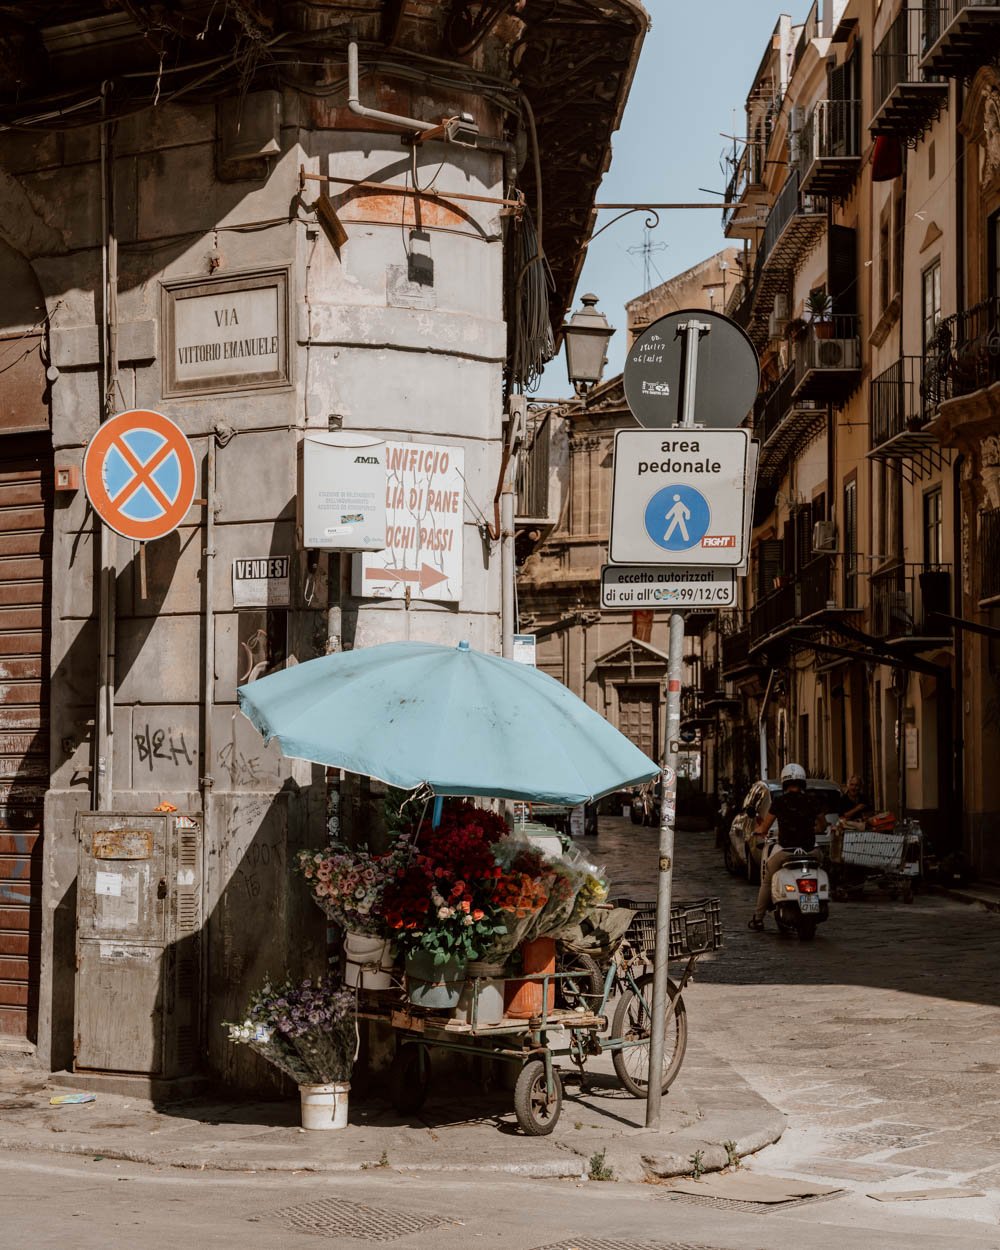 A typical street scene in Palermo, Sicily